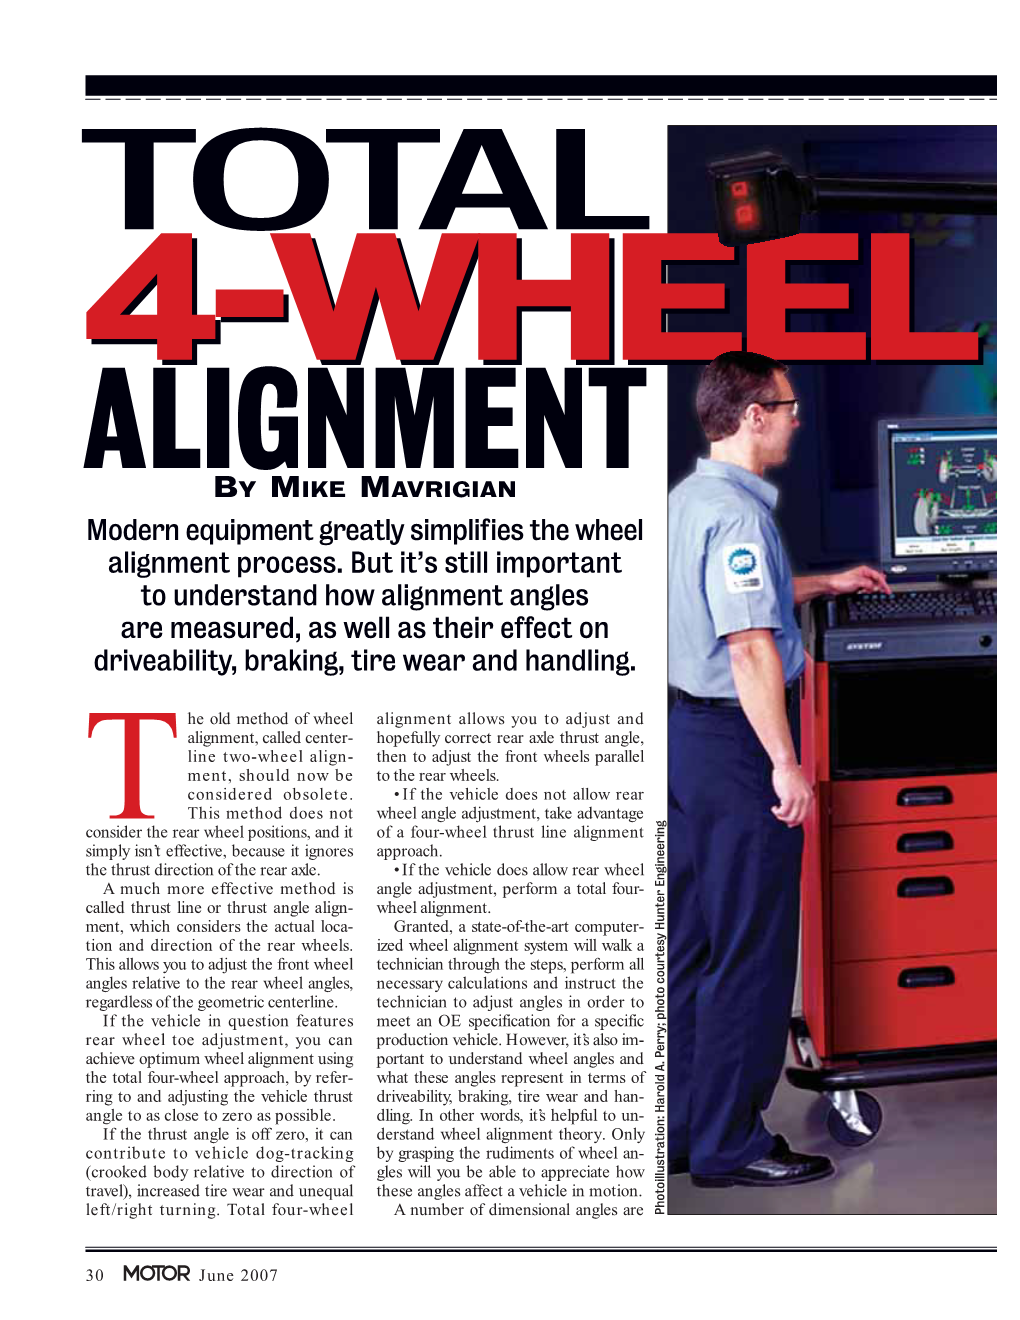 Modern Equipment Greatly Simplifies the Wheel Alignment Process. But